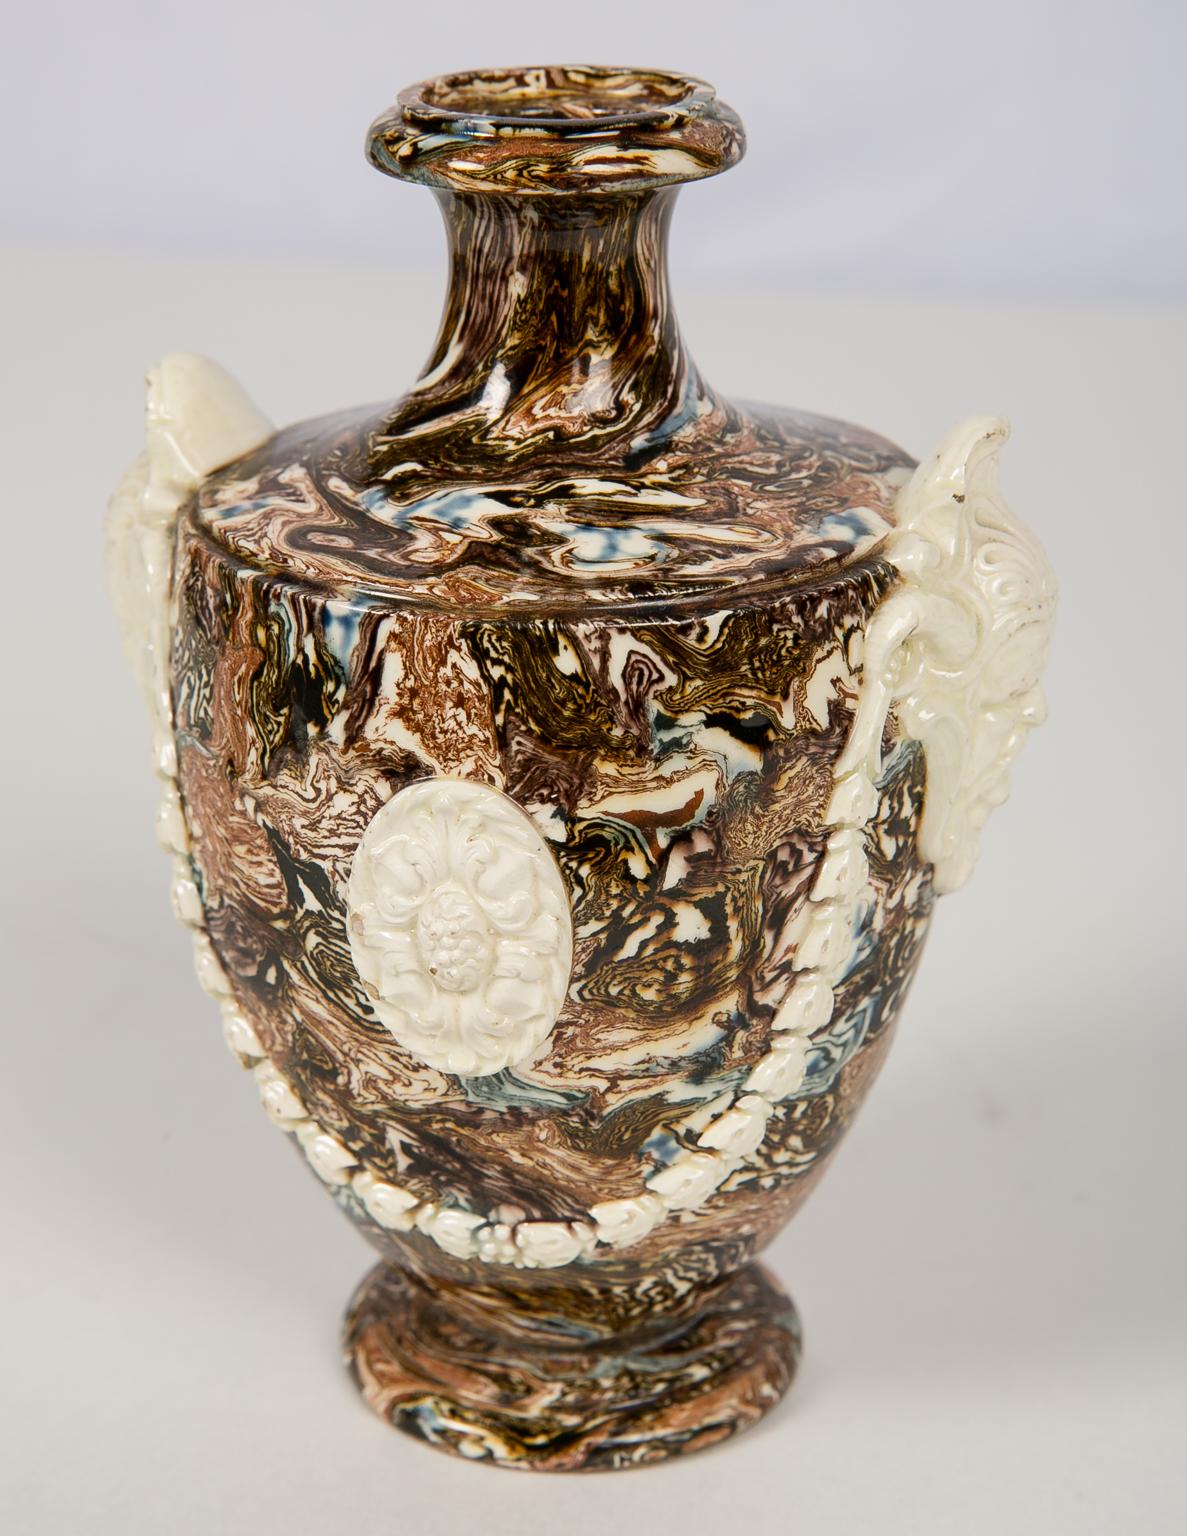 English Solid Agateware Vase 18th Century Made by Neale & Co.